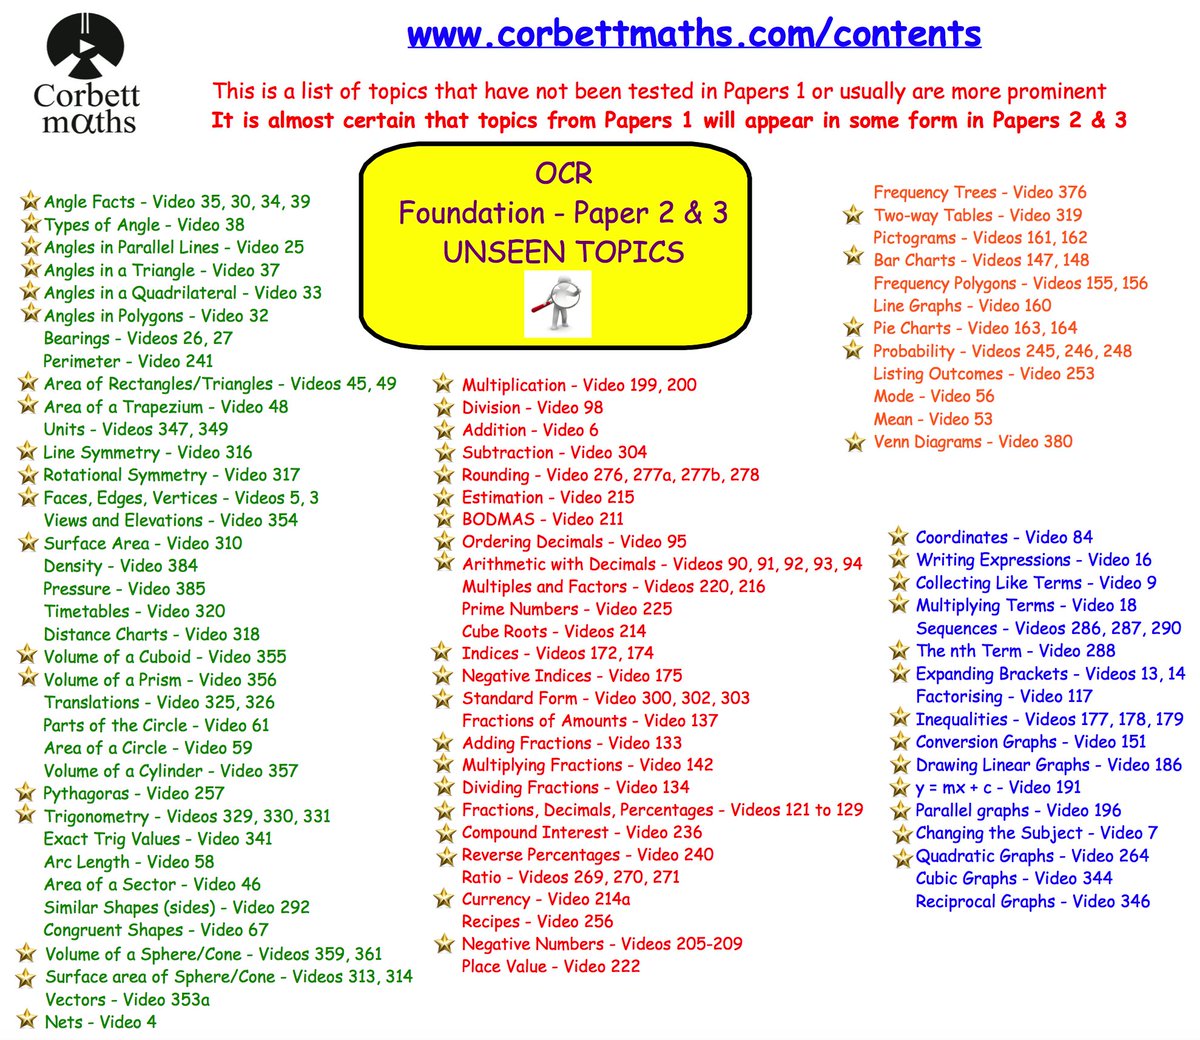 Corbettmaths Ocr Foundation Paper 2 3 Unseen Topic Checklist The Starred Topics Are Topics That I Feel Have A Very High Chance Of Appearing In P2 Or P3 The Others